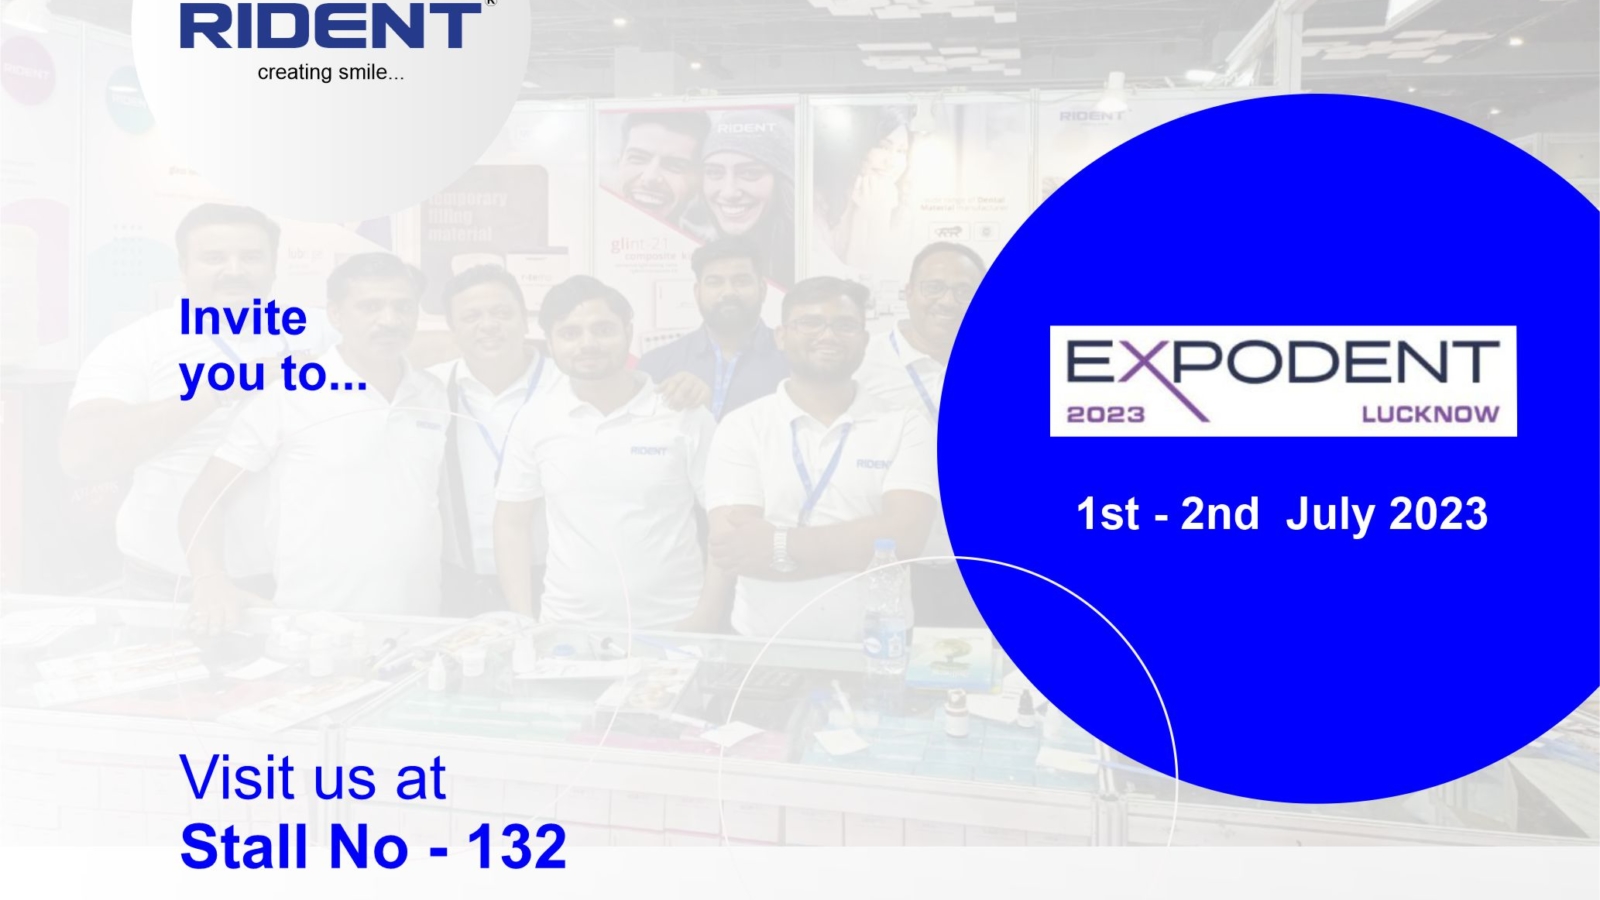 Expo-Lucknow-July 2023